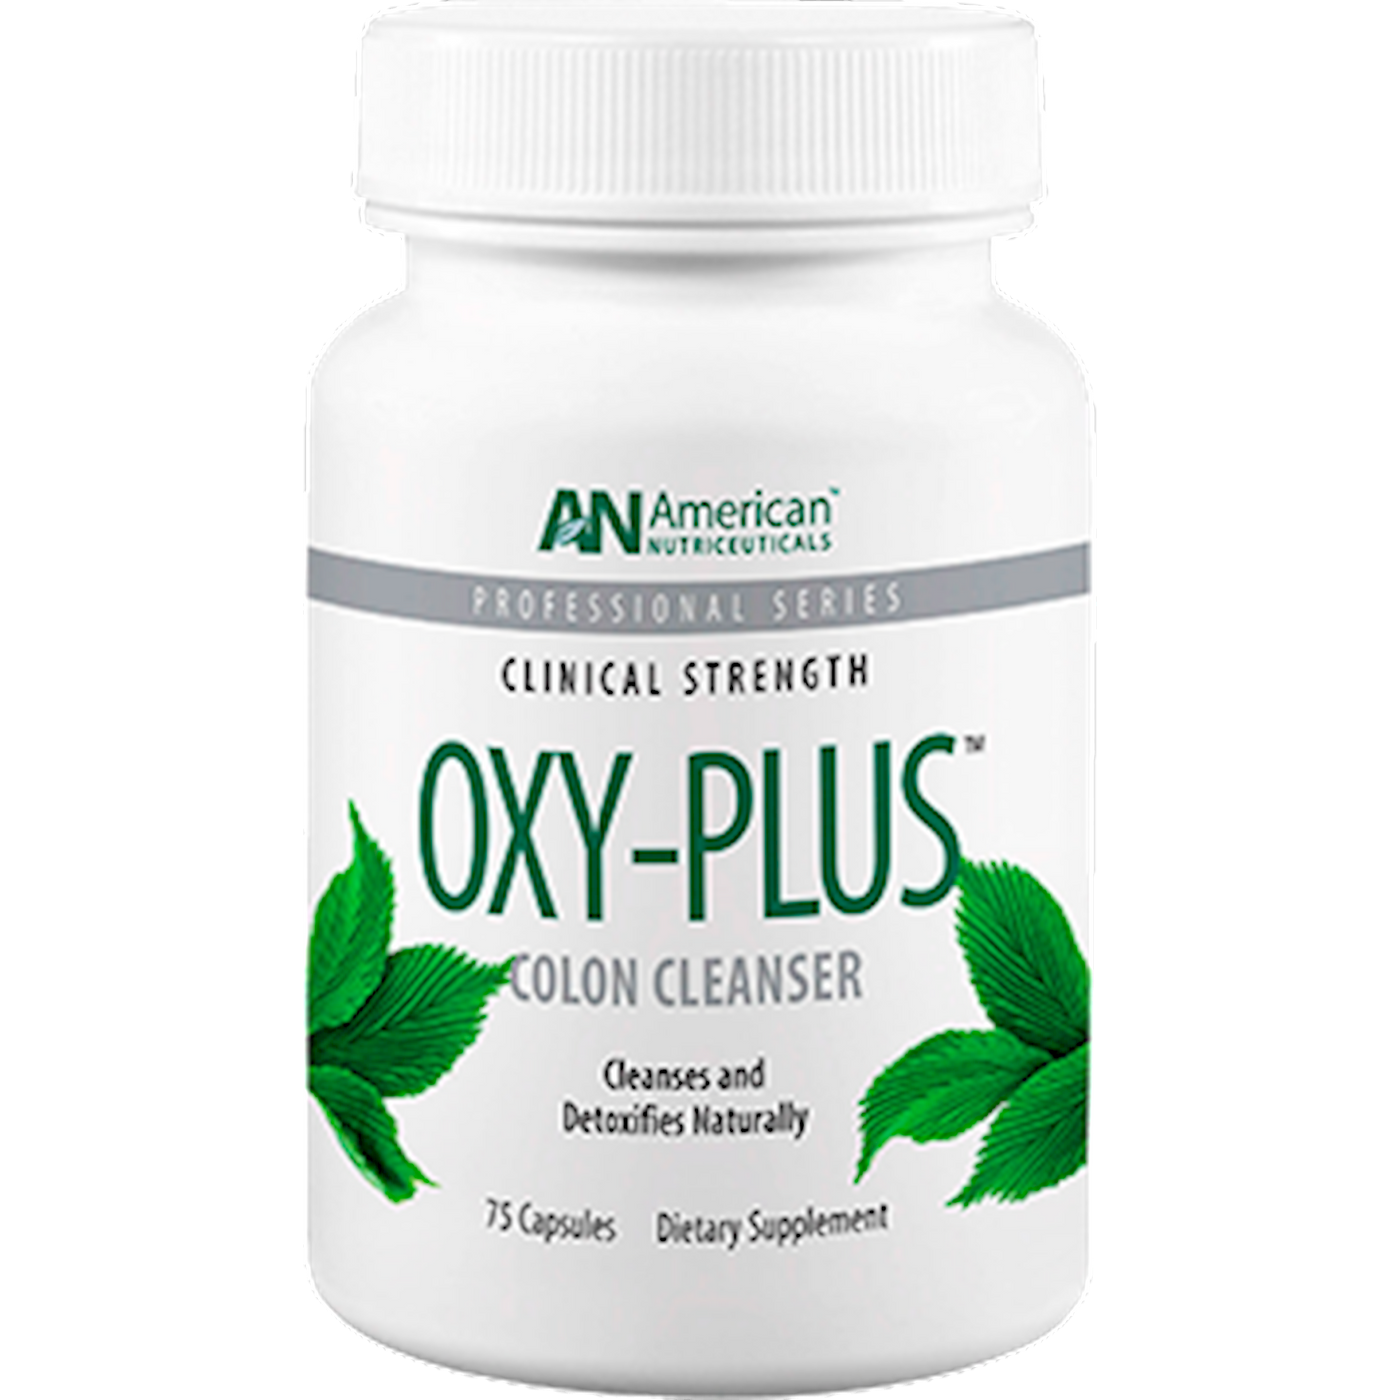 Oxy-Plus  Curated Wellness